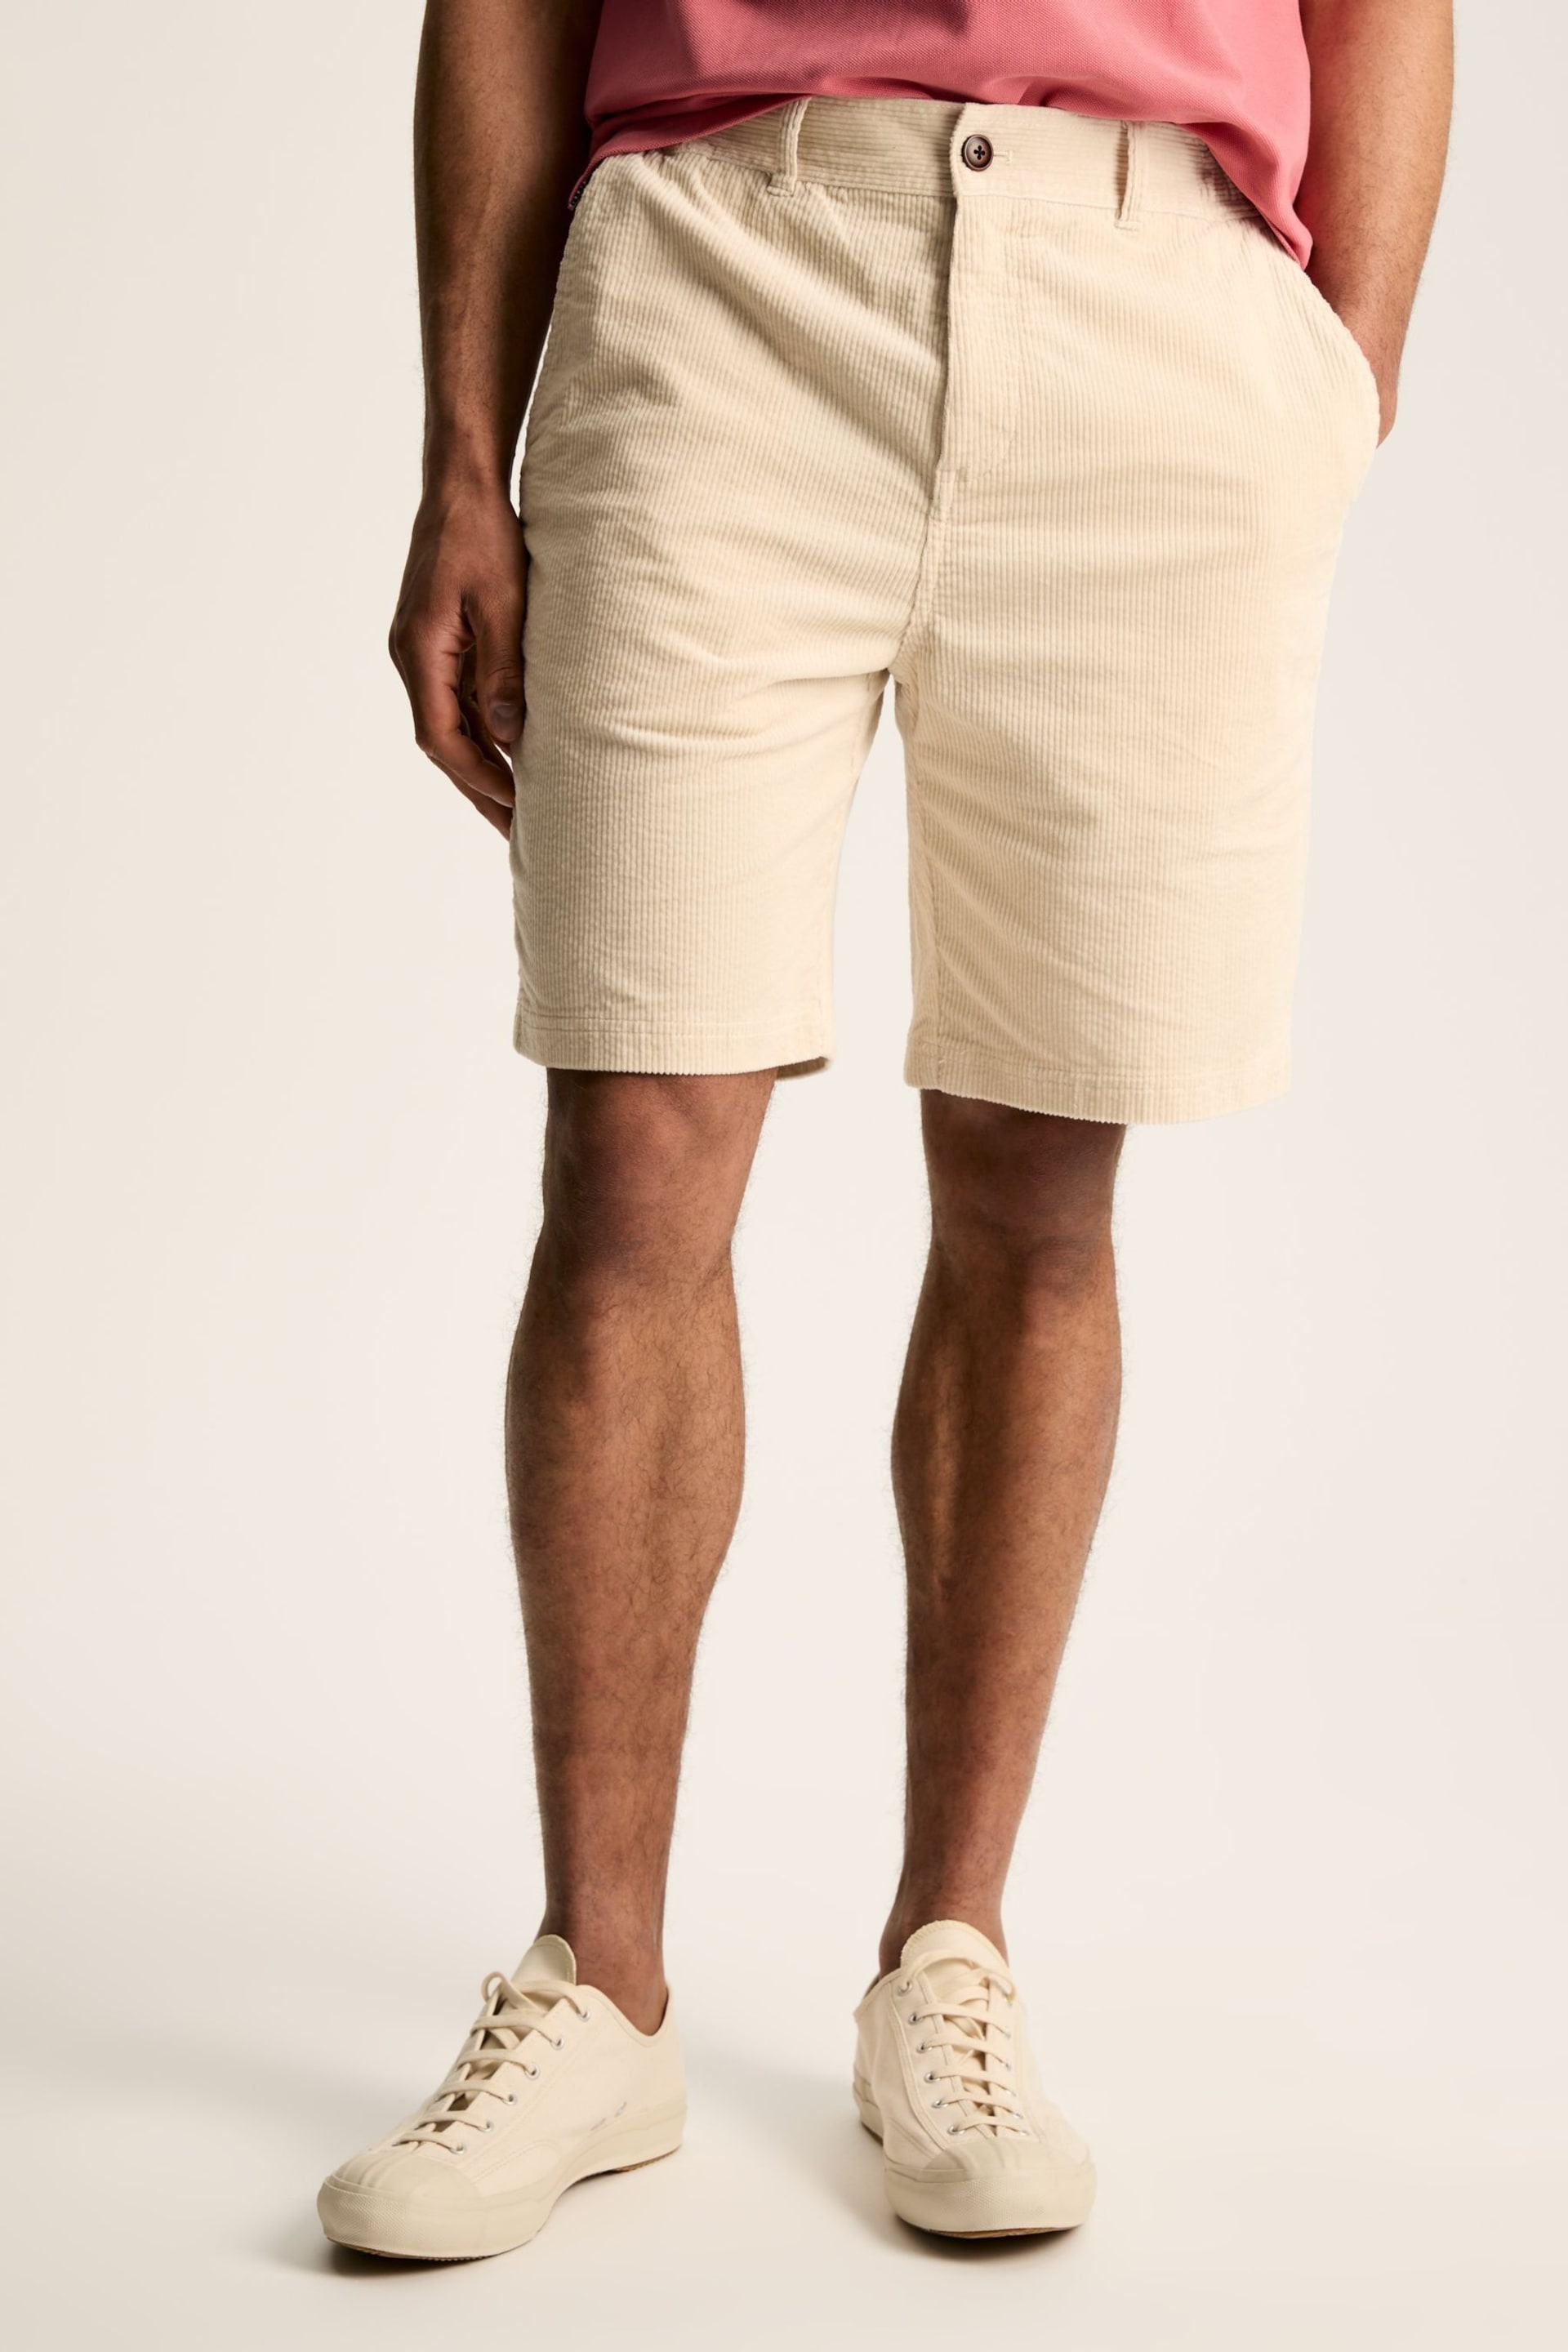 Joules Cord Cream Elasticated Waist Shorts - Image 1 of 6